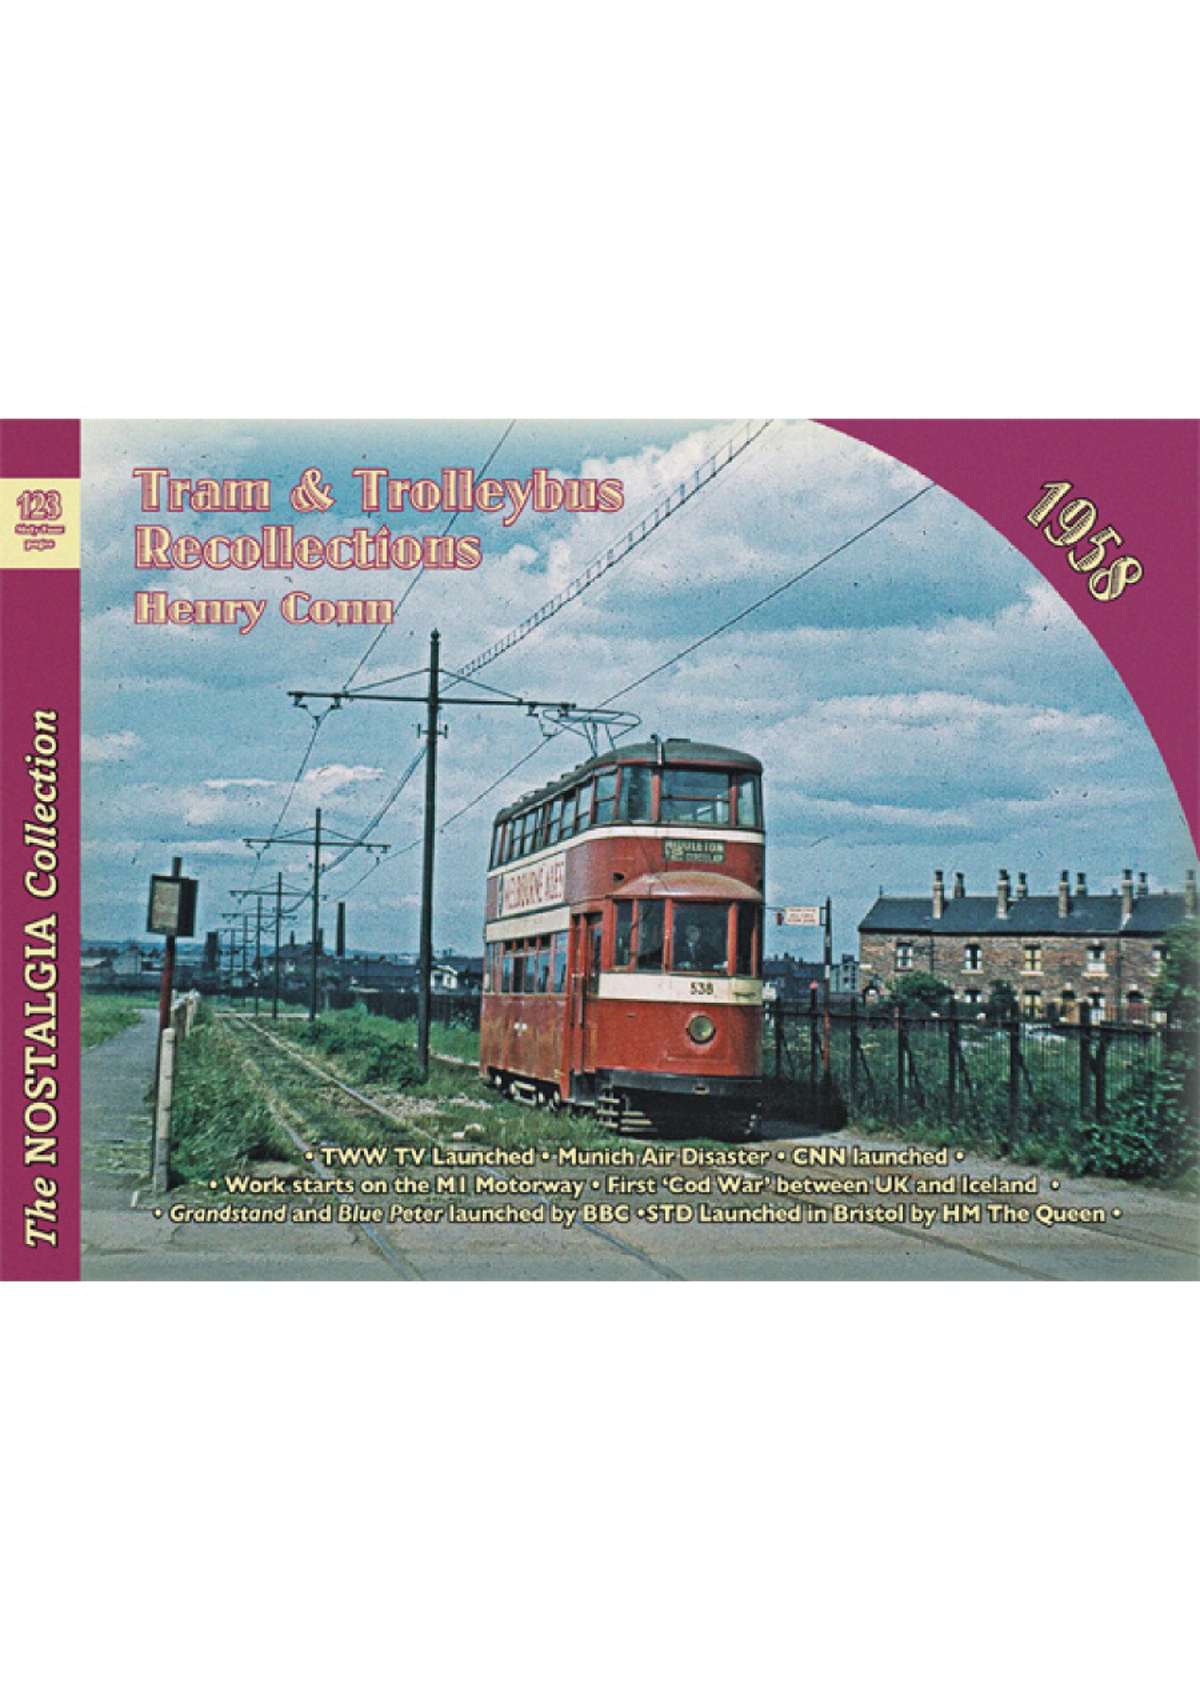 Tram & Trolleybus Recollections 1958 part 1